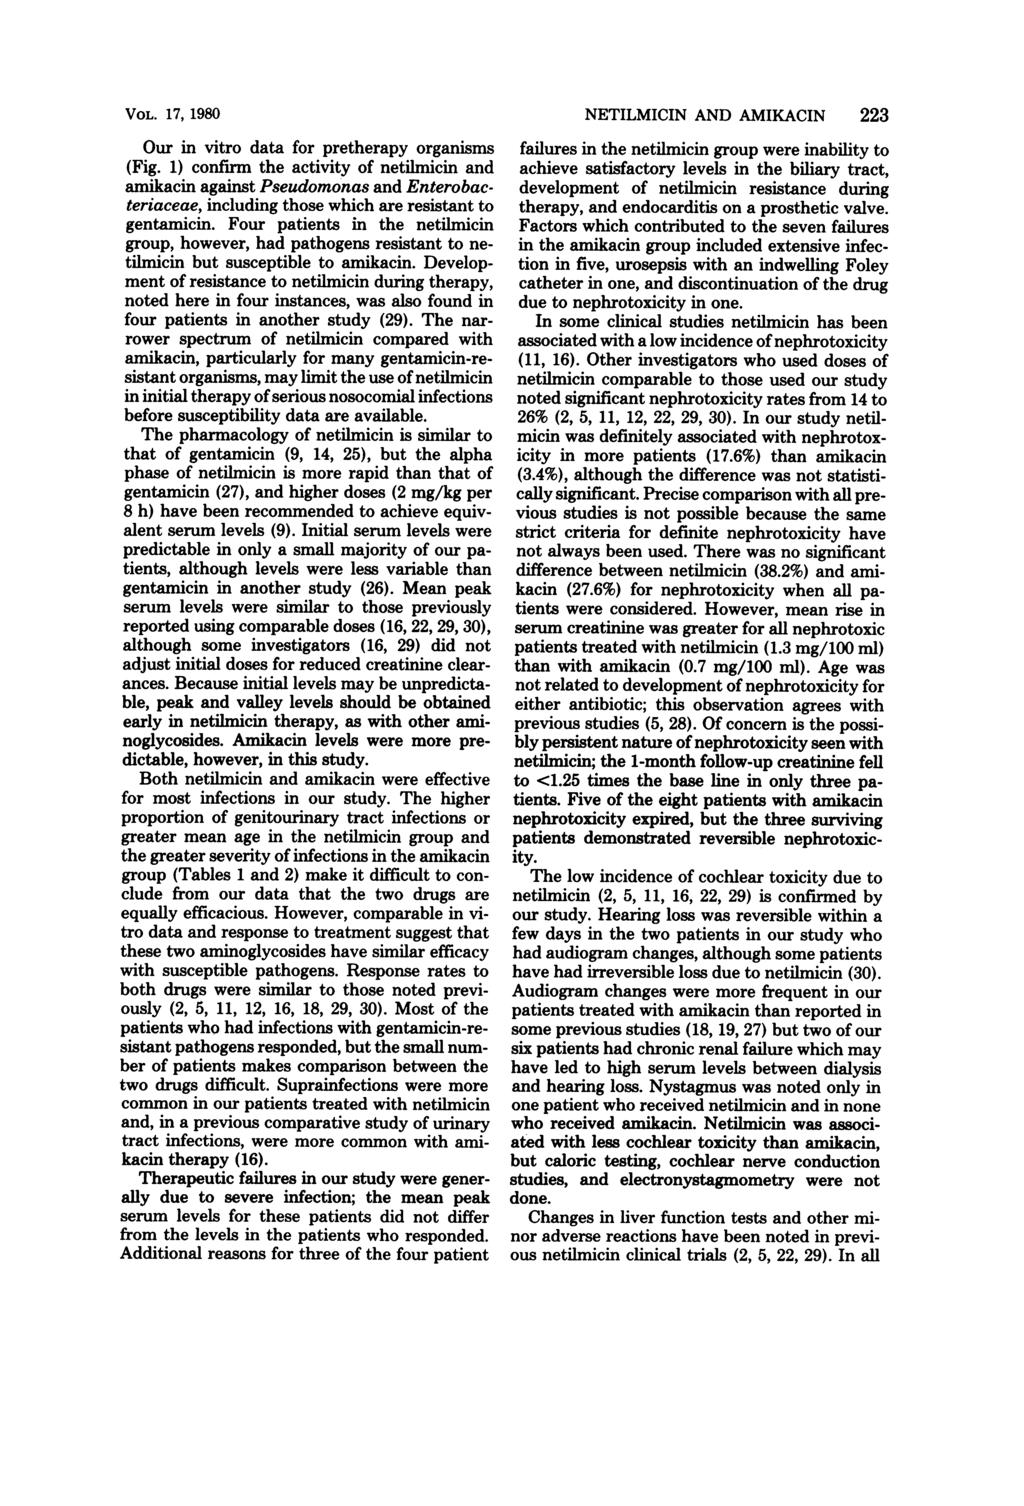 VOL. 17, 1980 Our in vitro data for pretherapy organisms (Fig.